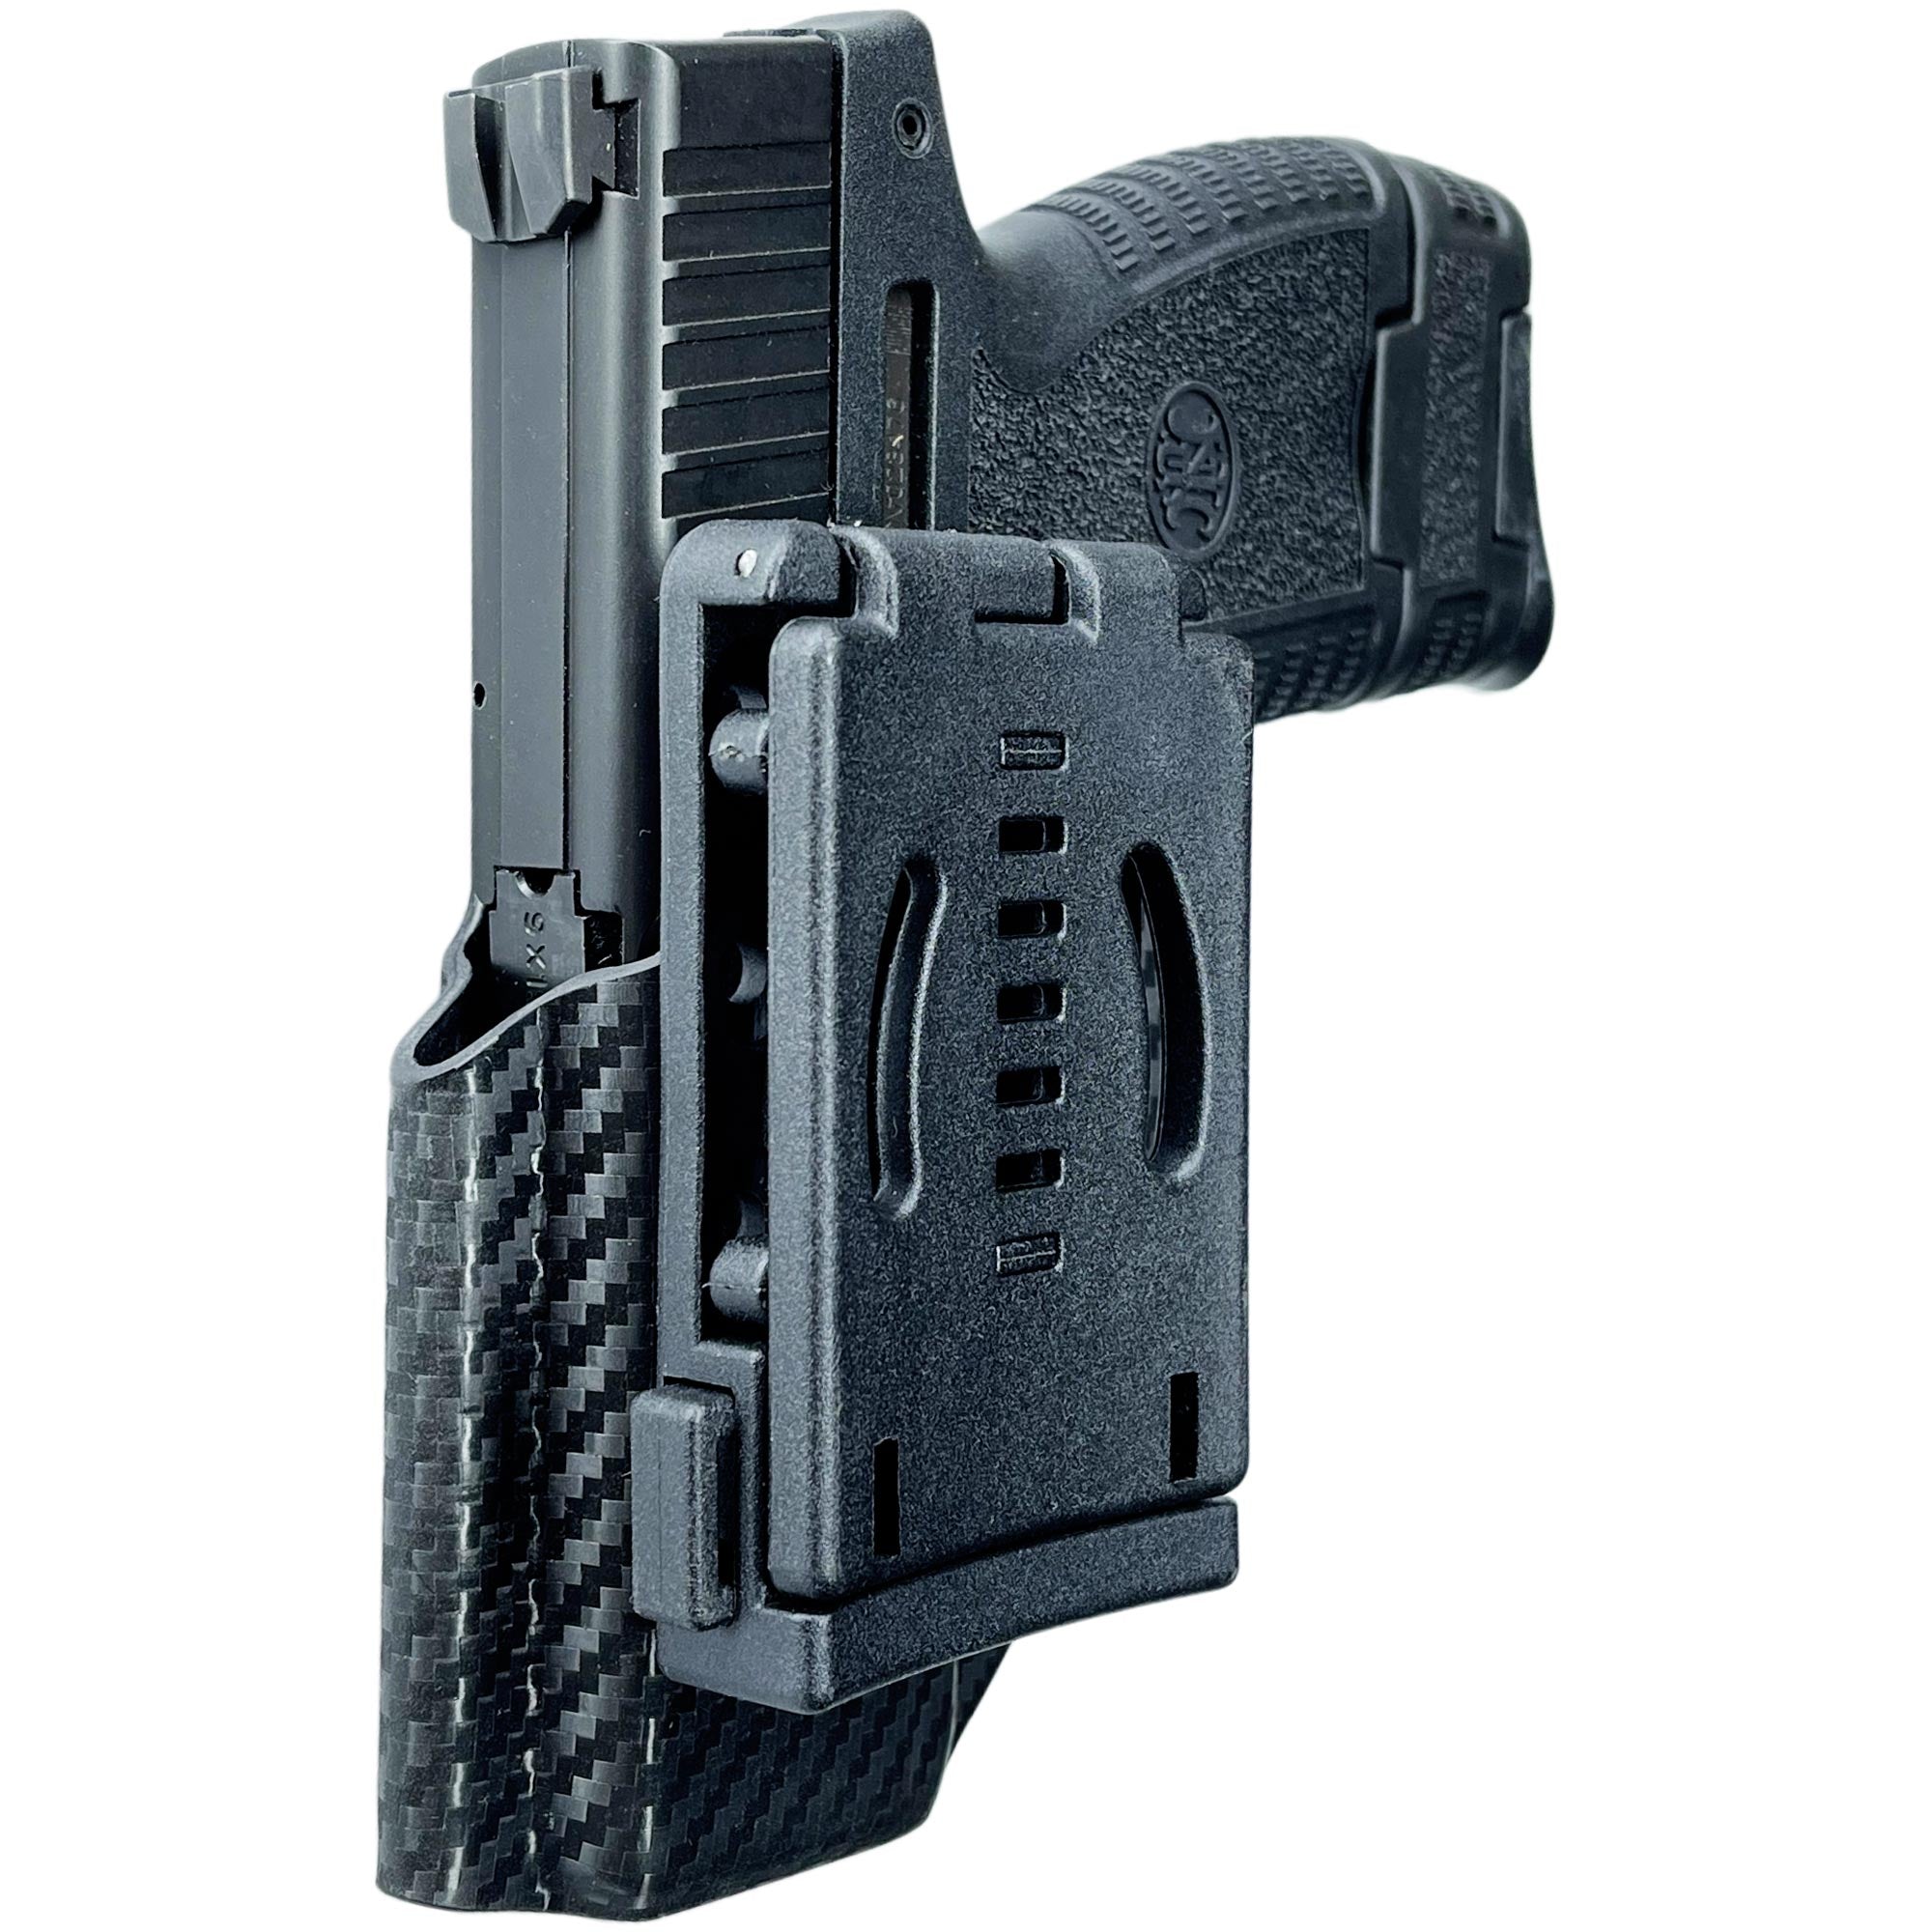 Pro IDPA Competition Holster for FN 503 - Carbon Fiber 2